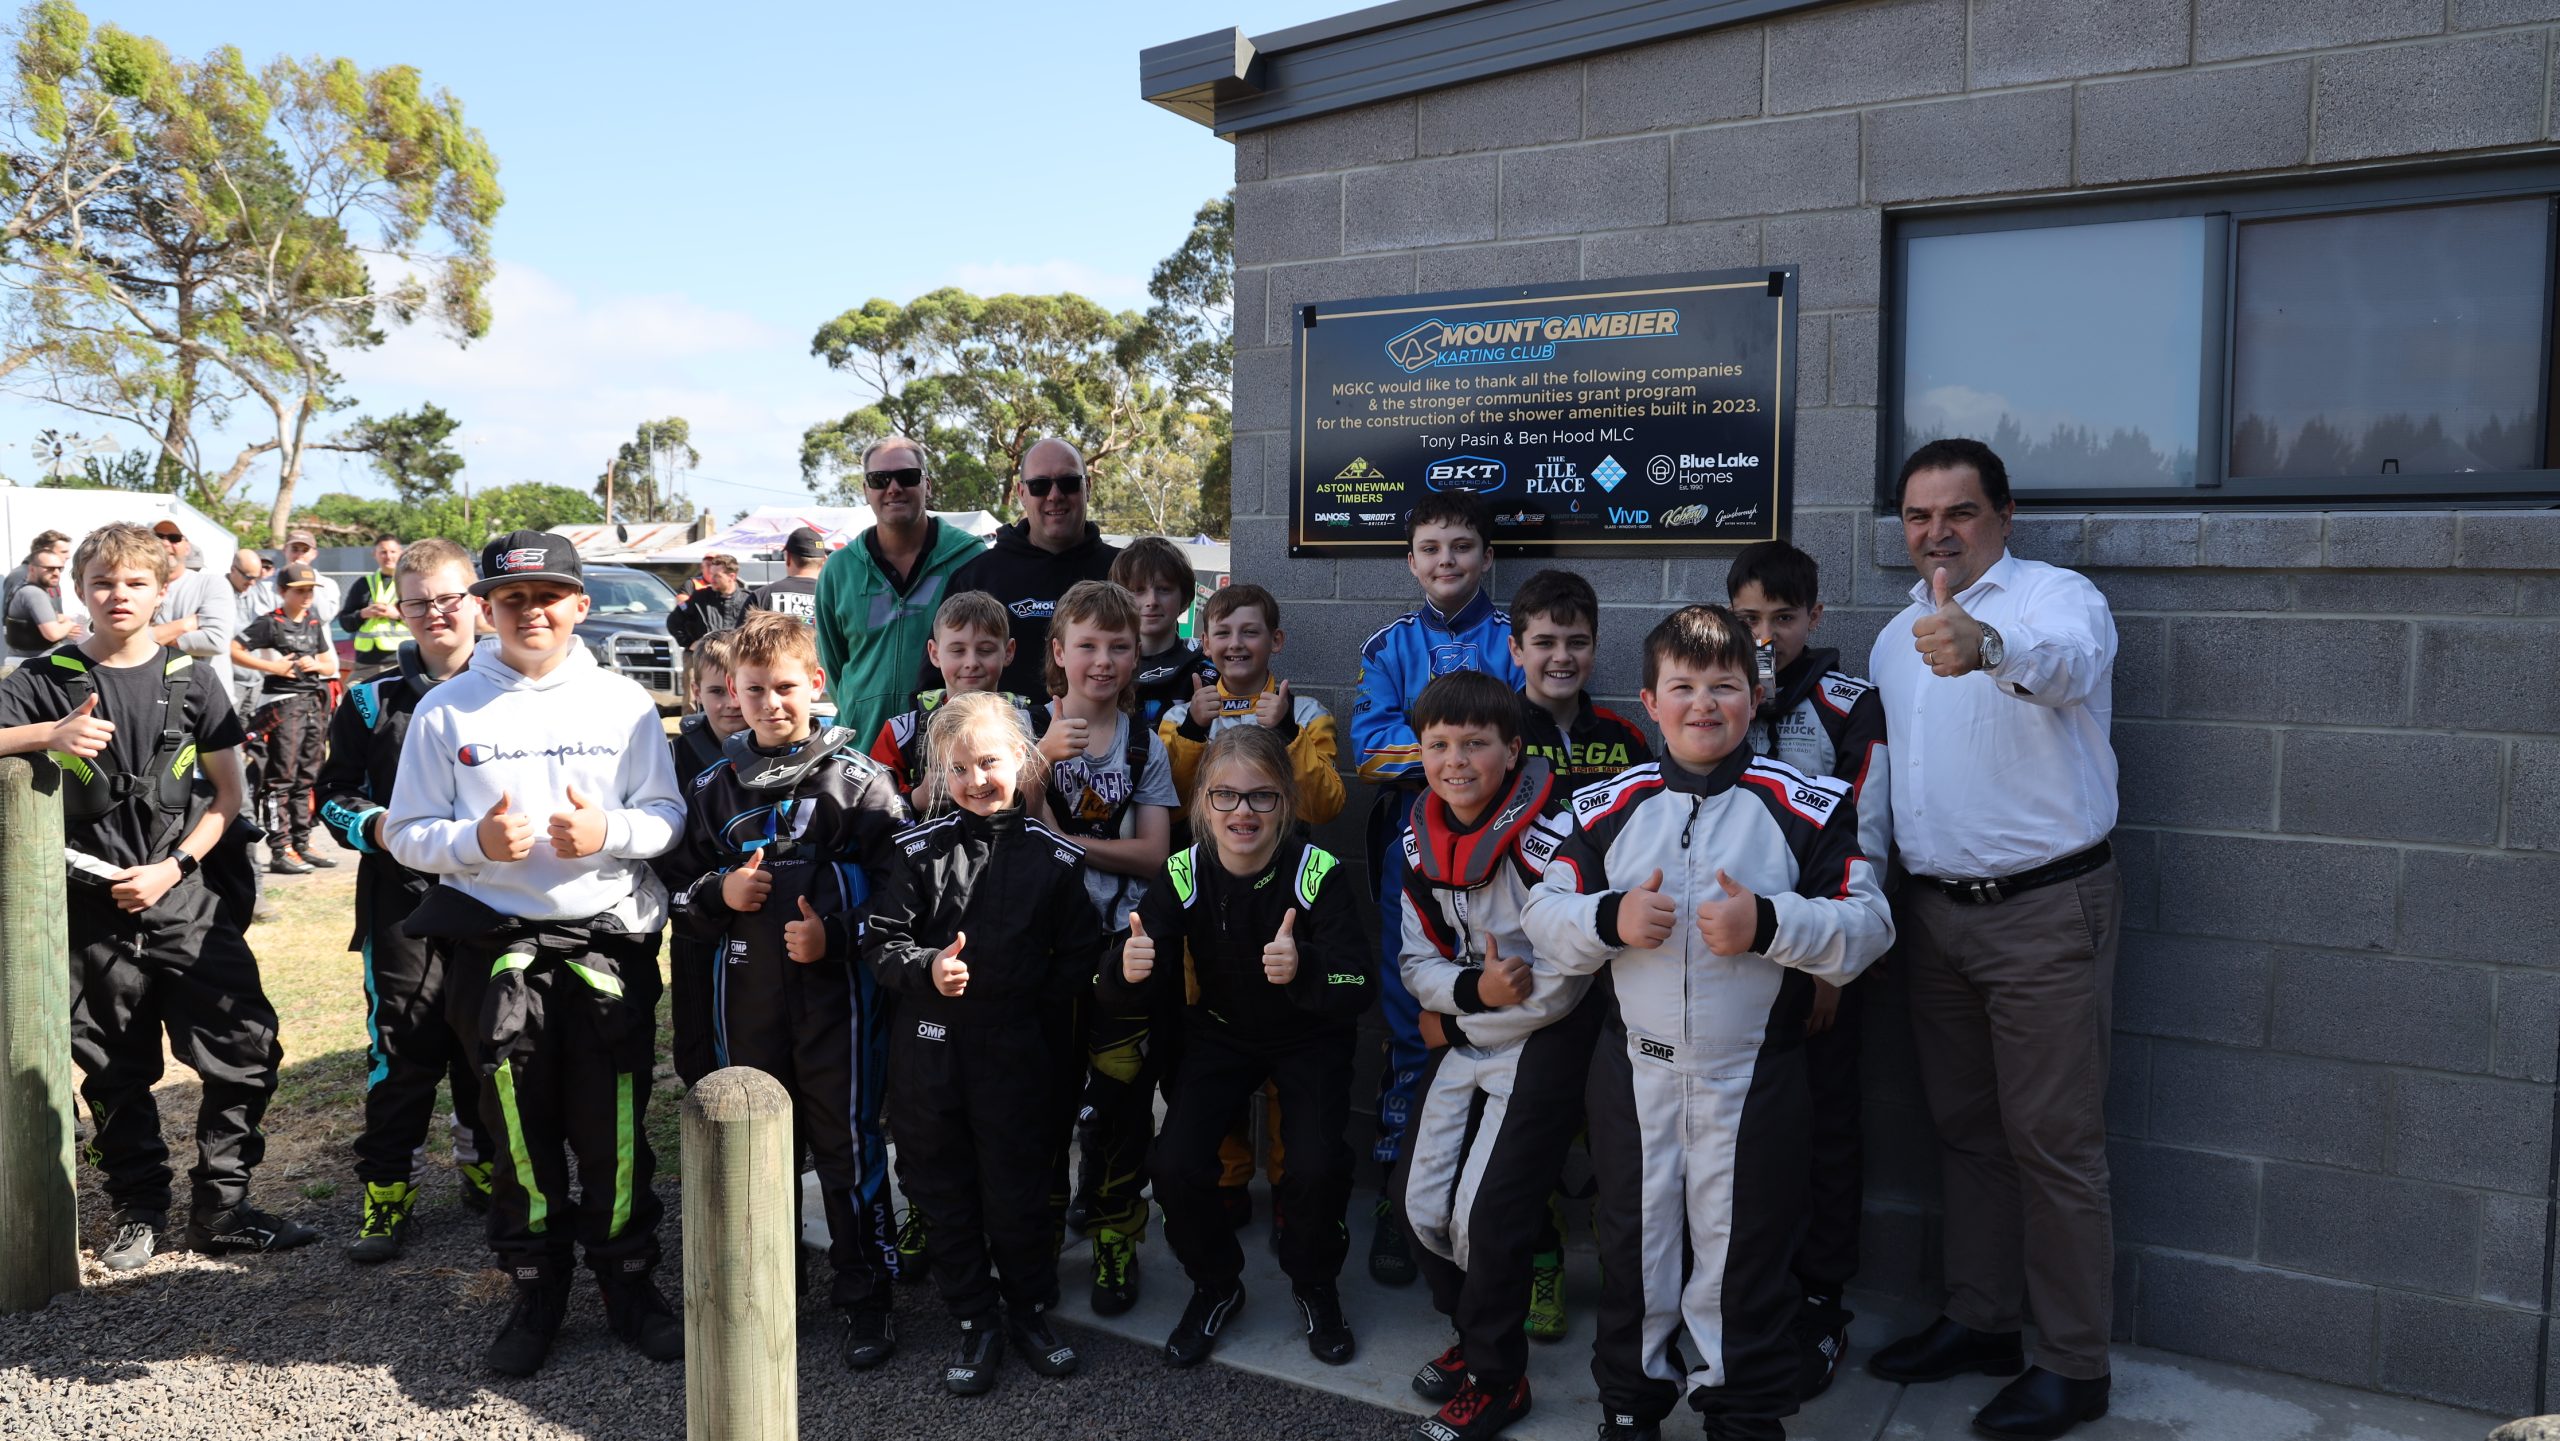 MOUNT GAMBIER KARTING CLUB CELEBRATES NEW FACILITIES